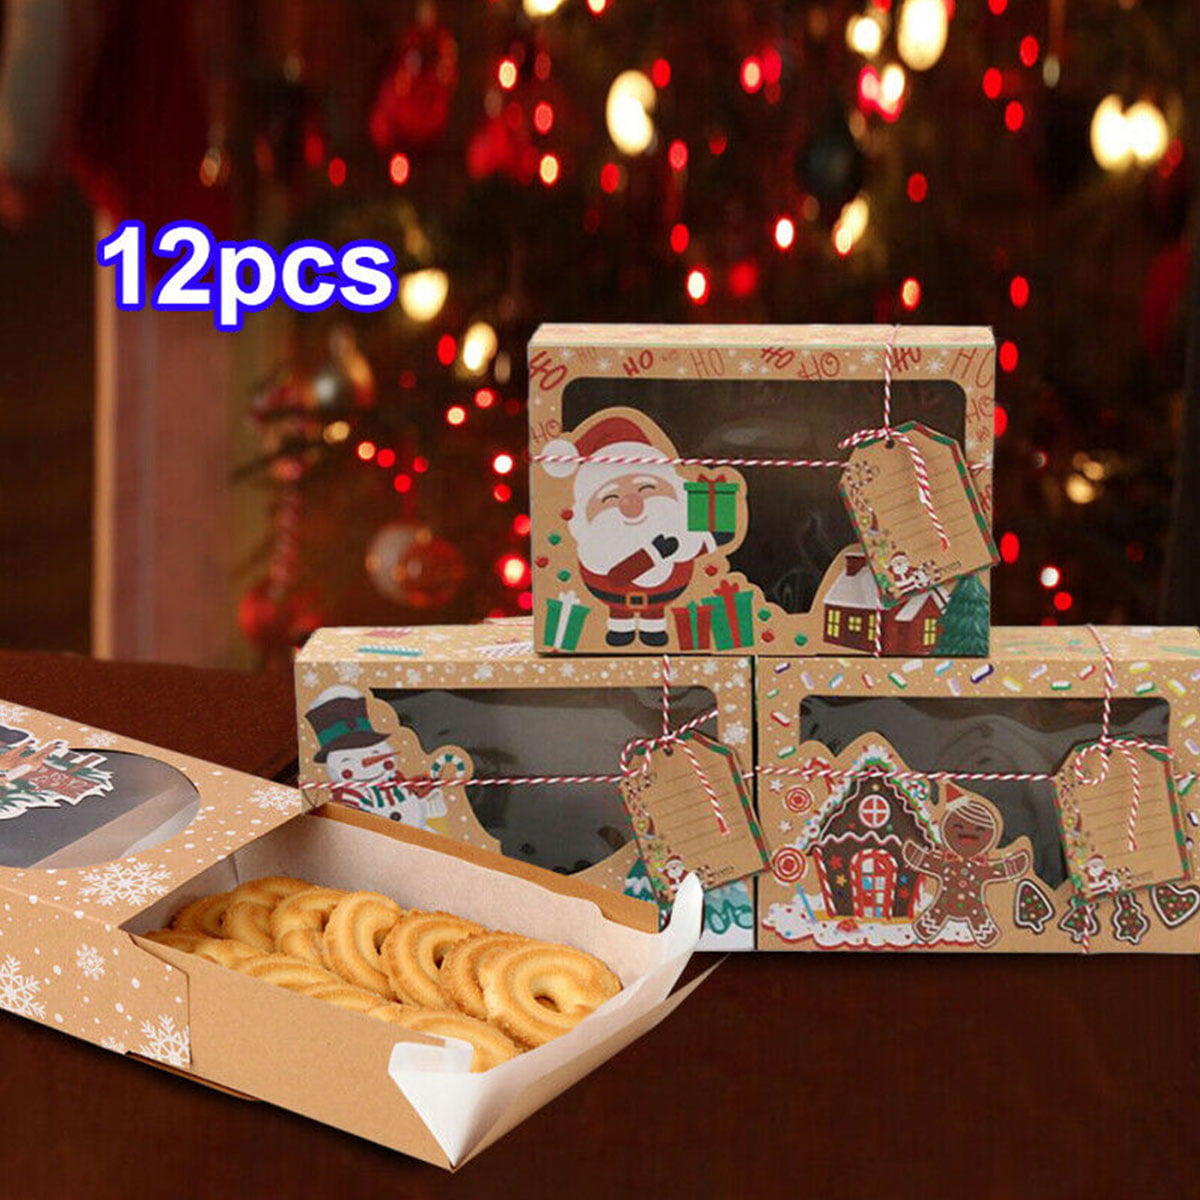 12pcs Biscuit Boxes Paper Candy Treat Box DIY Portable Party Supplies Gift Bag 